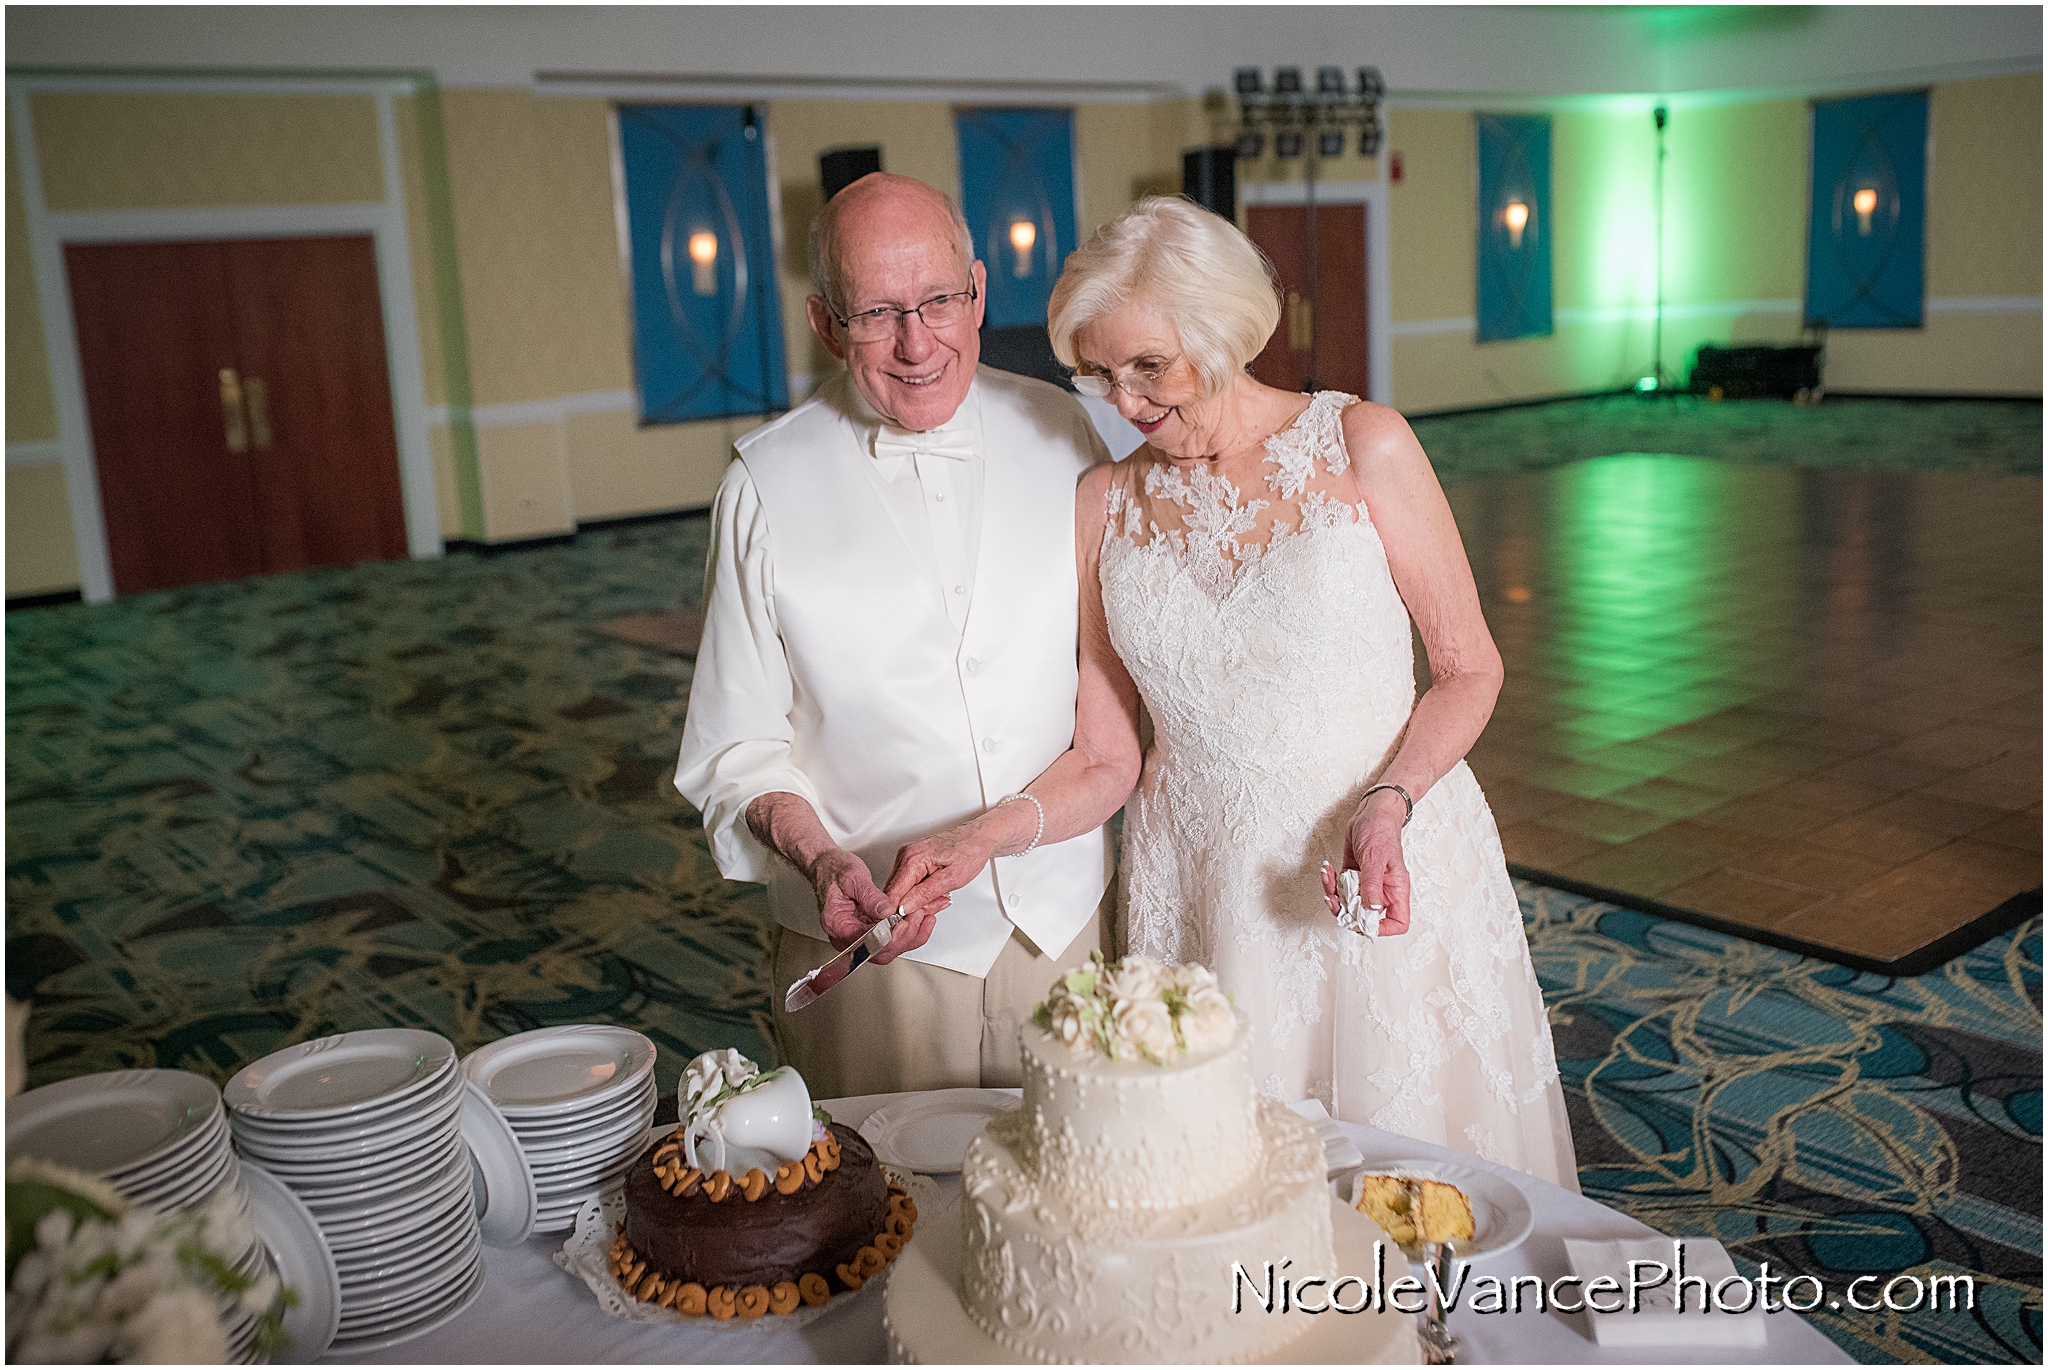 The bride and groom cut the cake in the ballroom at the Doubletree by Hilton Richmond-Midlothian.